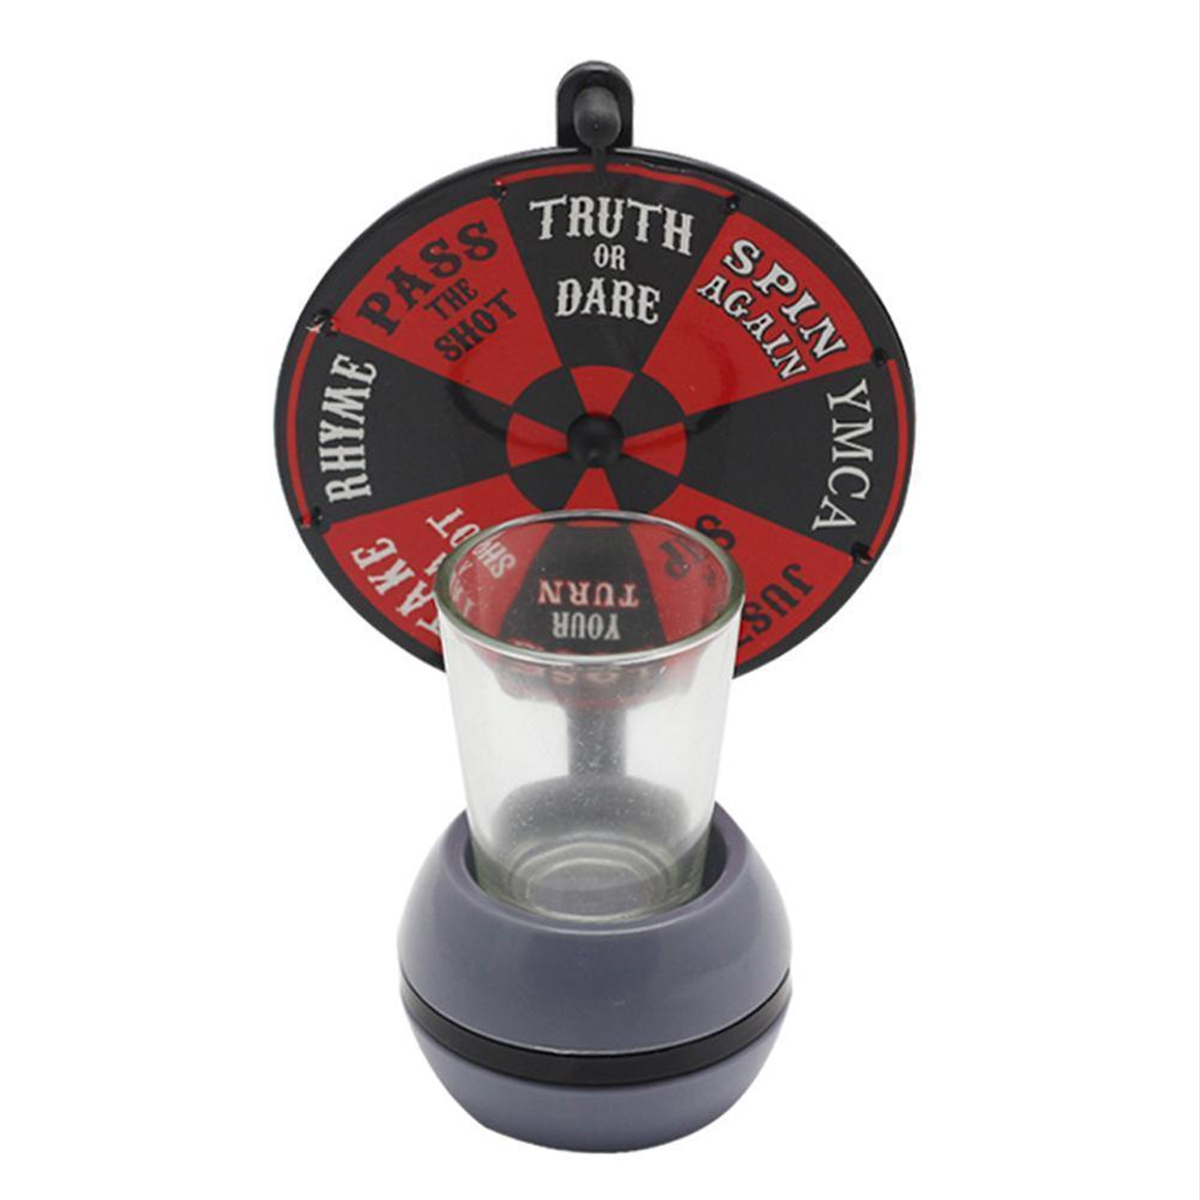 Spinner-Spin-The-Shot-Turntable-Glass-Alcohol-Drinking-Game-Roulette-Board-Game-Toy-Party-1395243